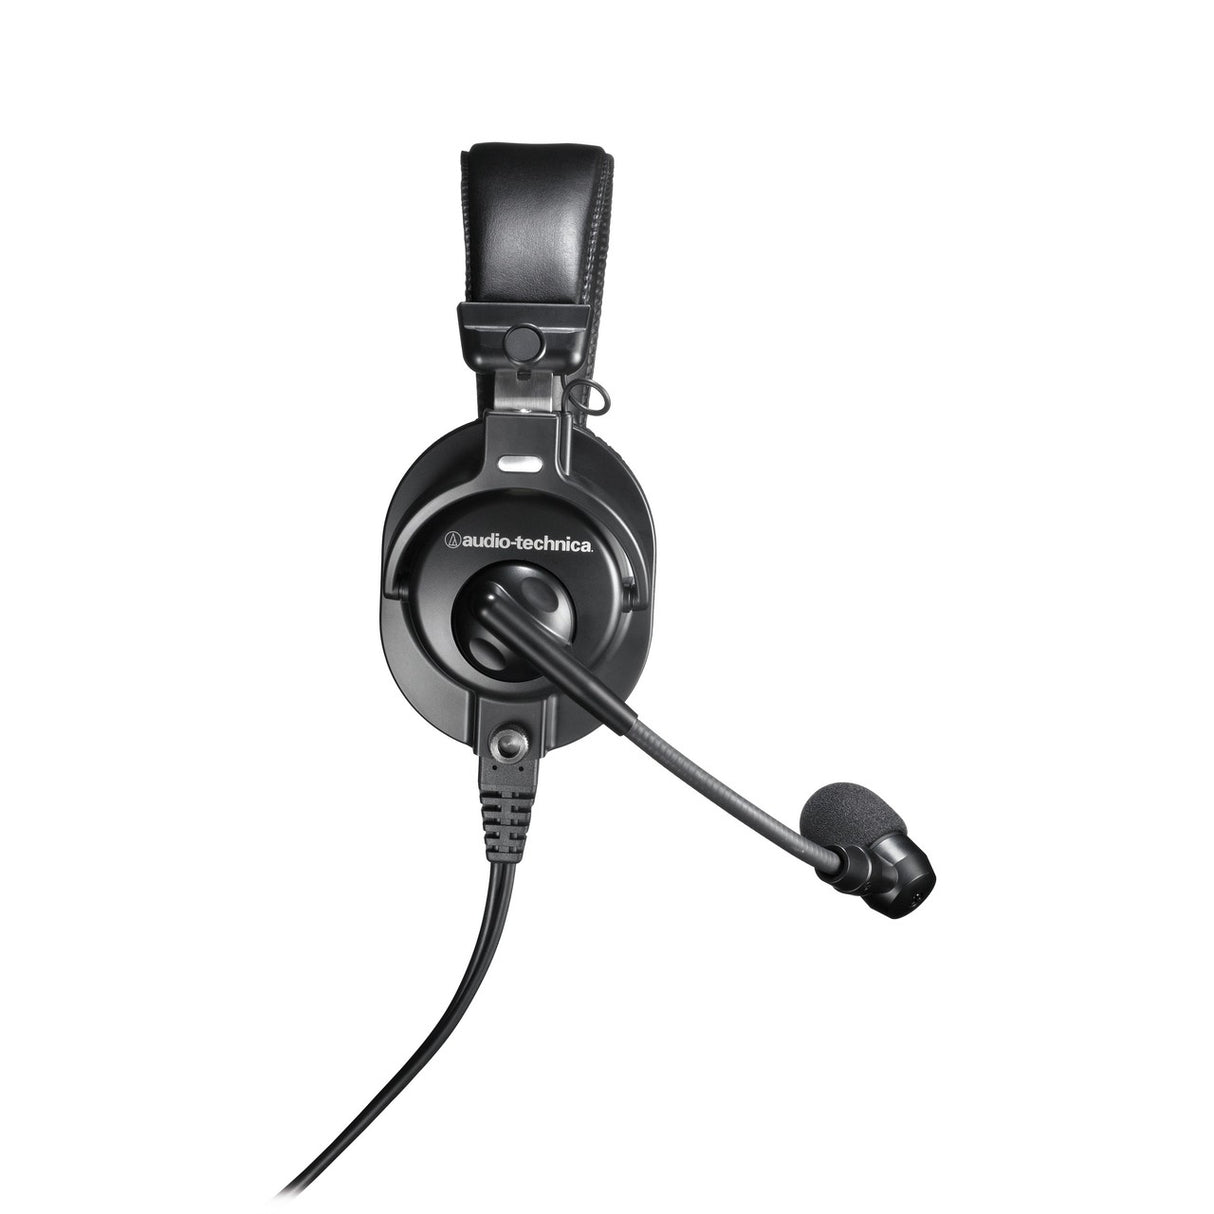 Audio Technica BPHS1 | Closed Back Cardioid Broadcast Stereo Headset